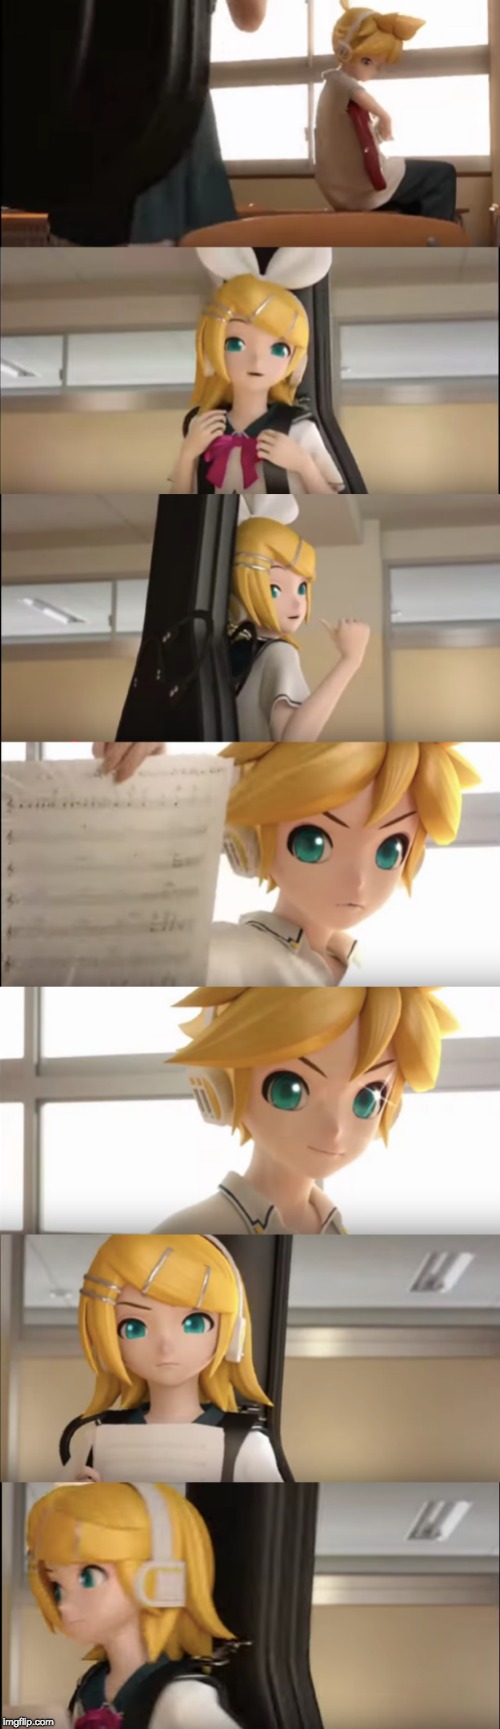 Rin and Len Kagamine Sibling Conversation Blank Meme Template